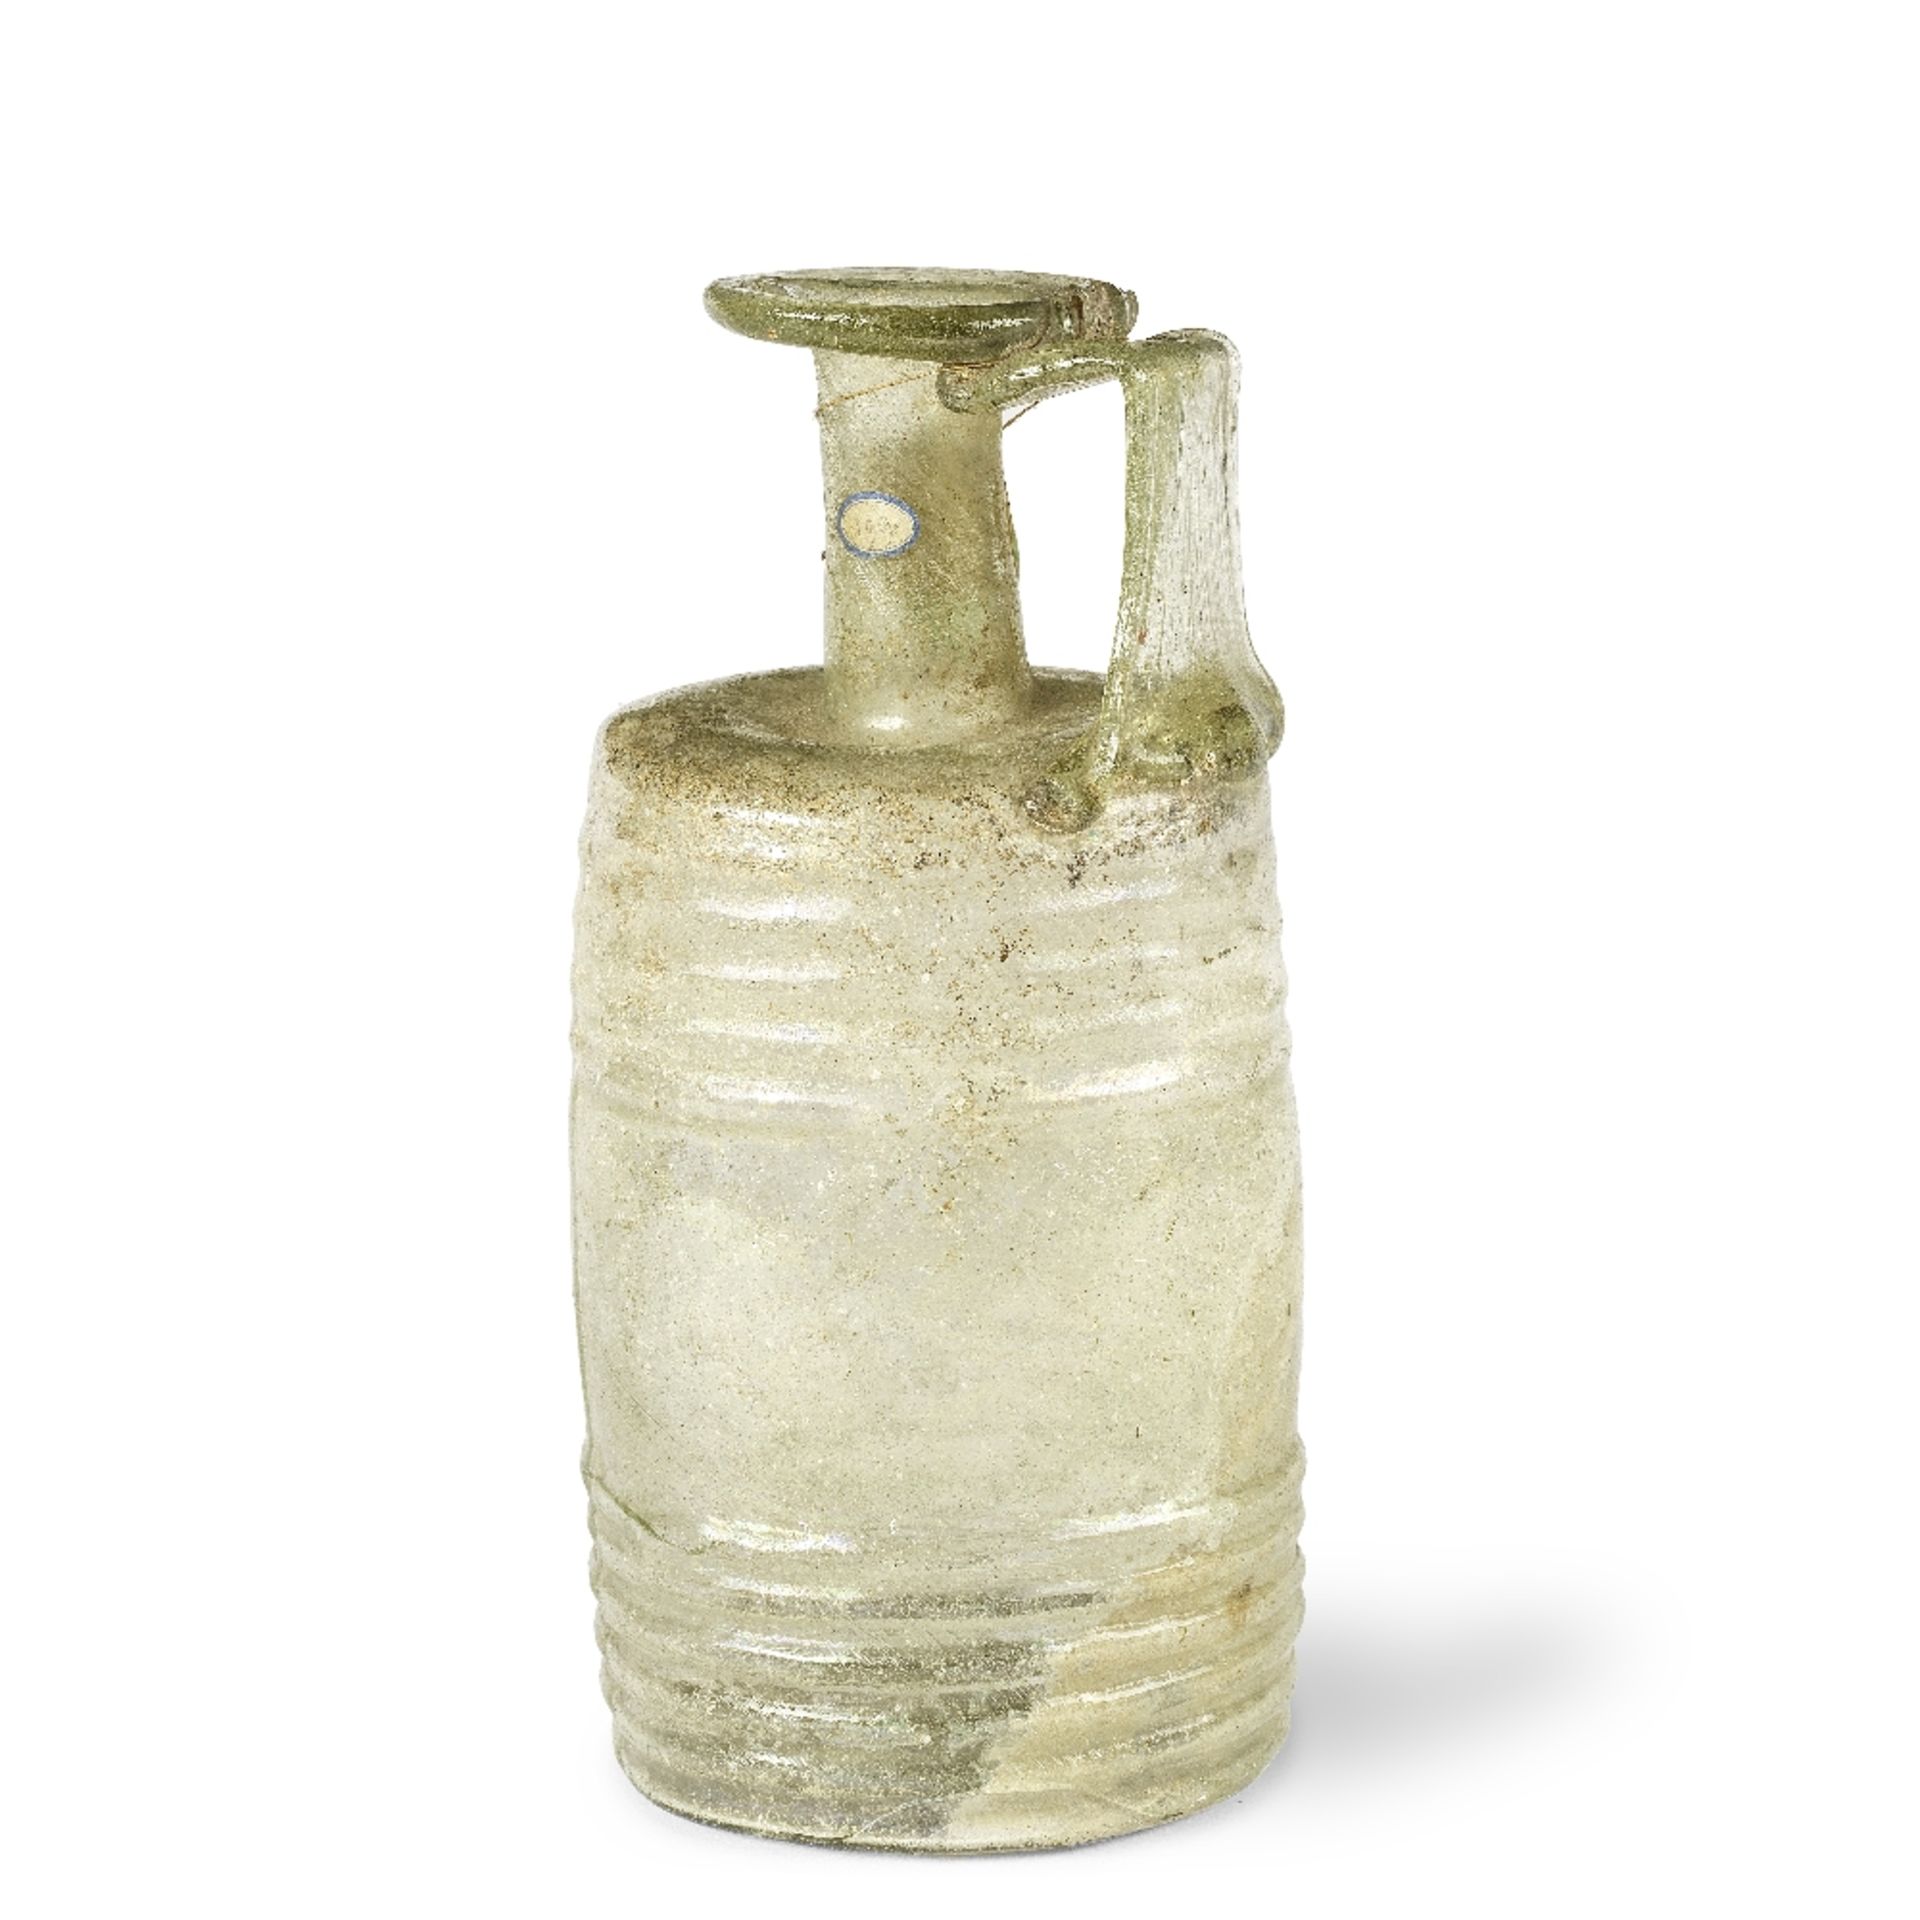 A Gallo-Roman cylindrical ribbed pale green glass handled bottle signed by Frontinus